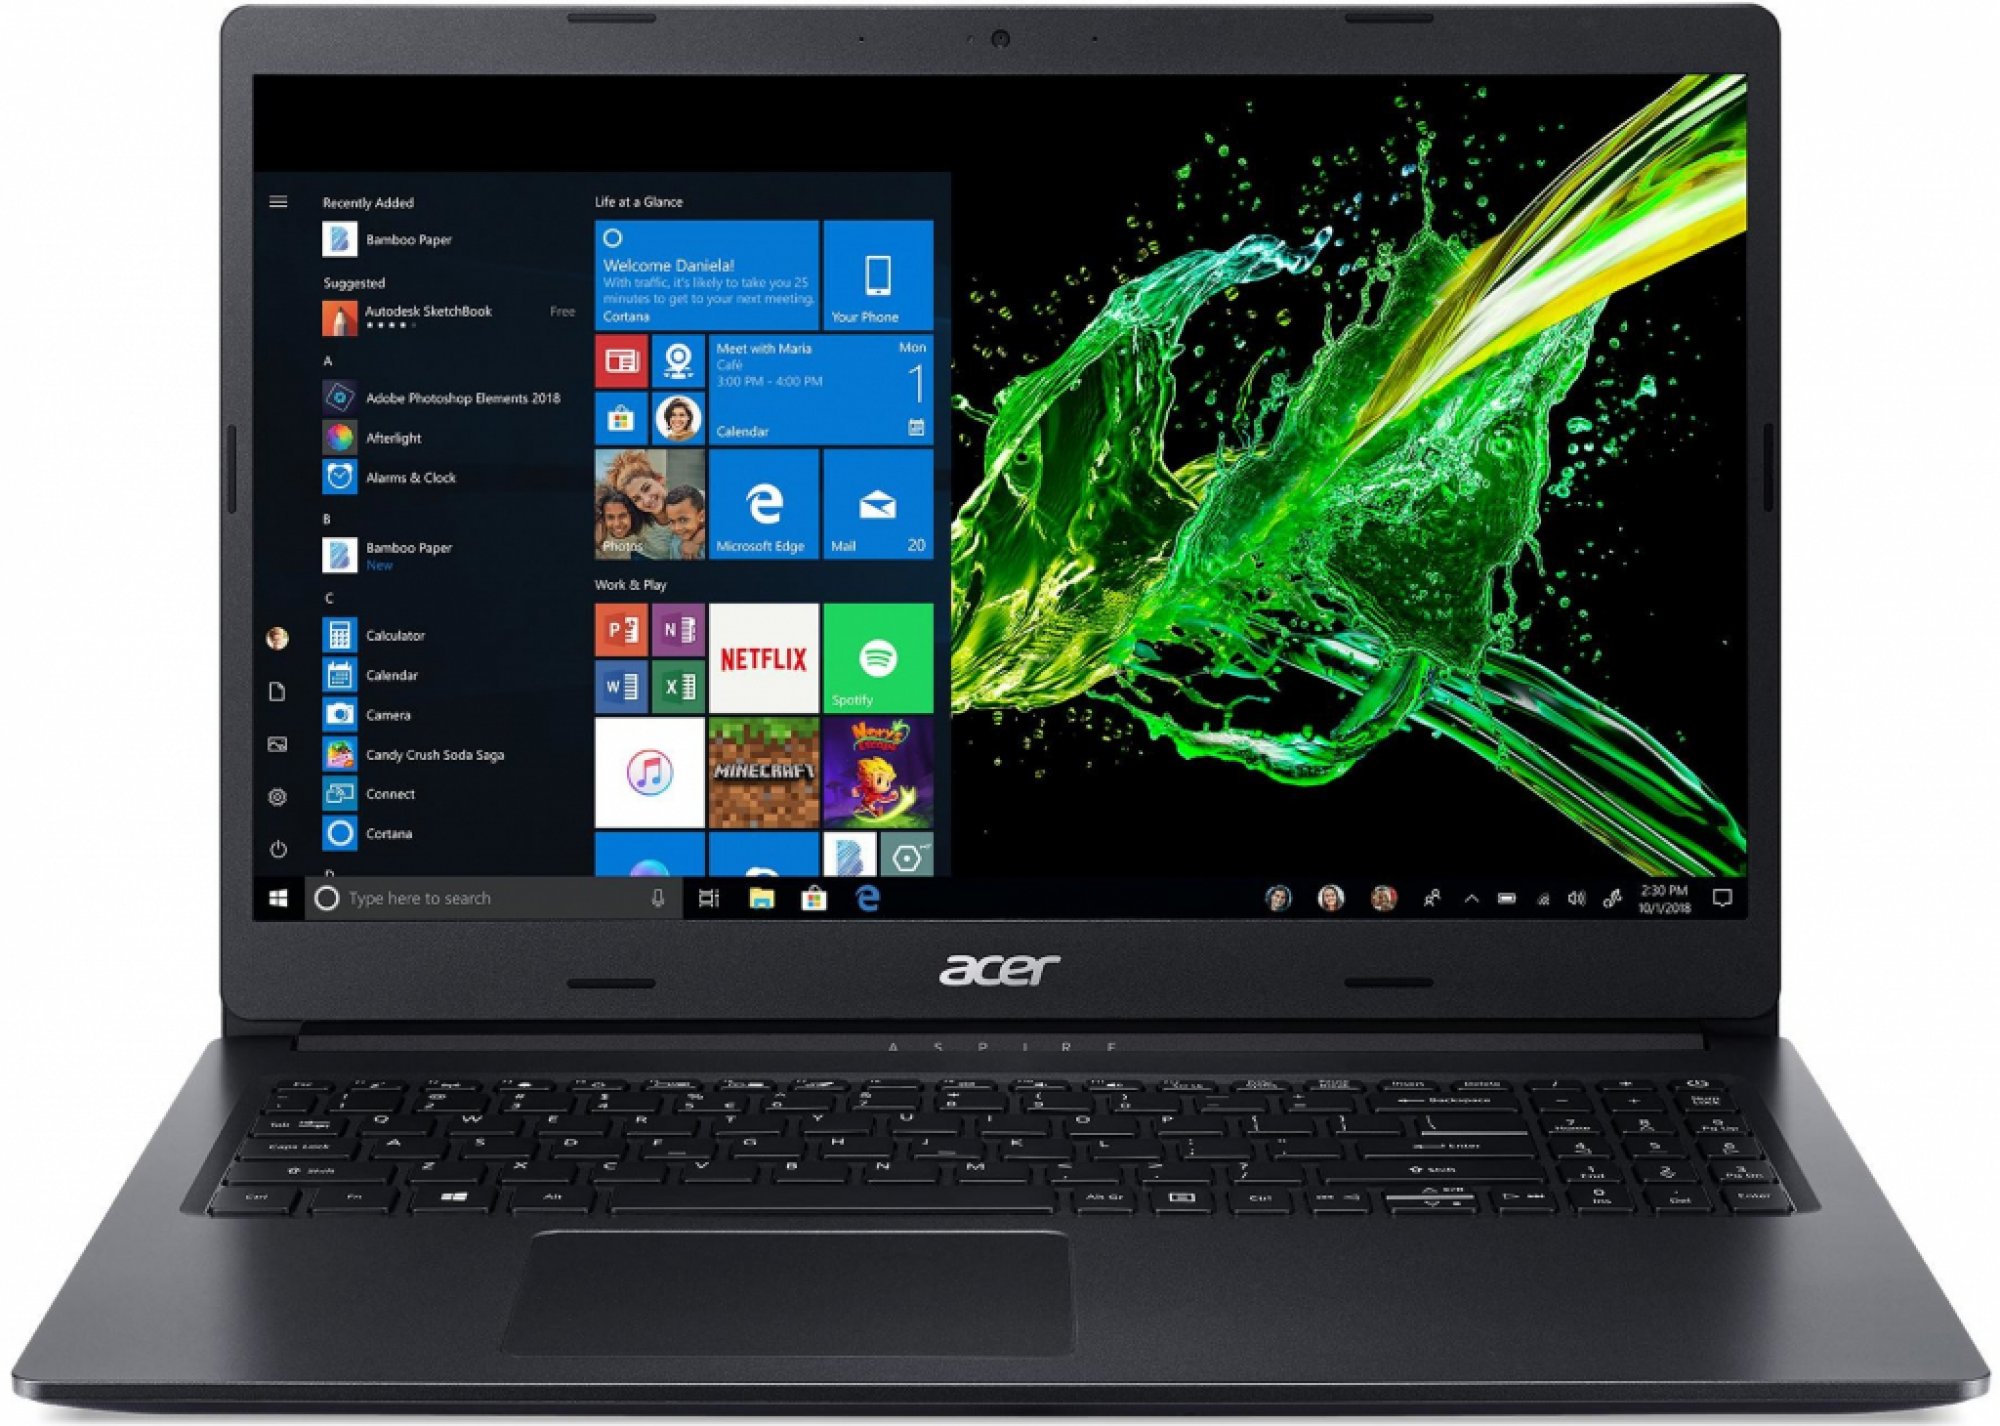 Acer Aspire 3 NX.HNSEC.002